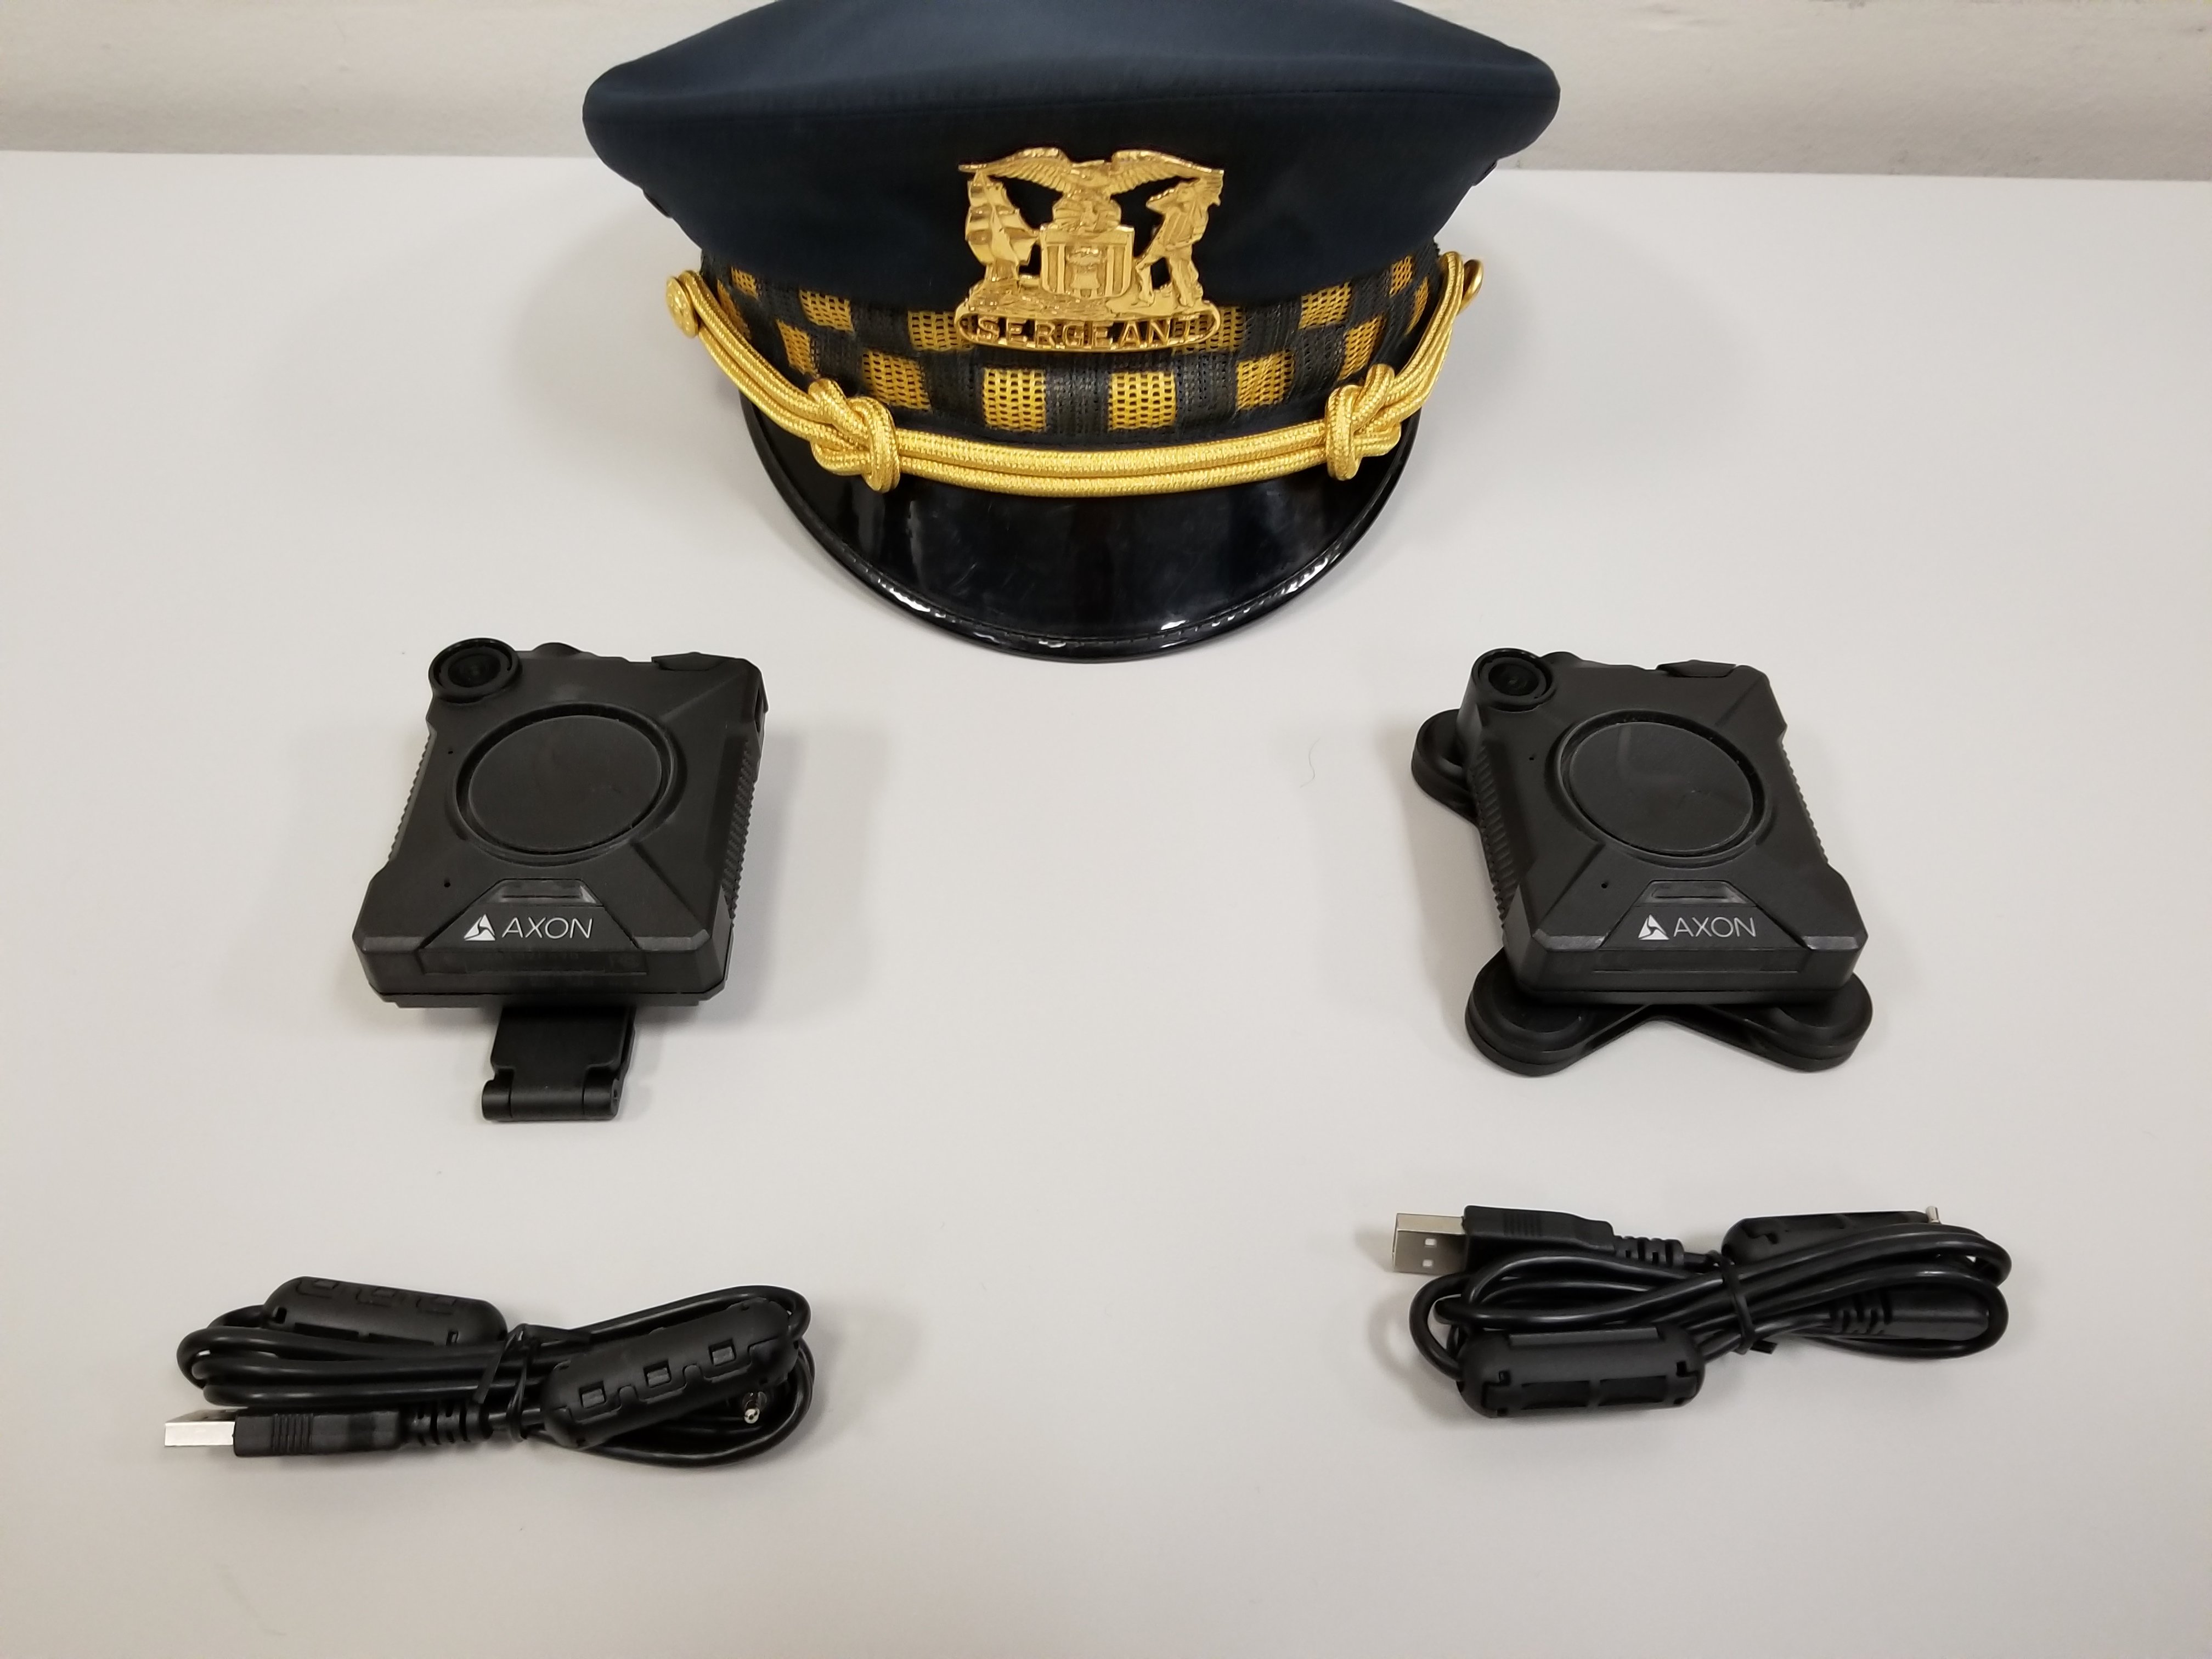 The department says it currently uses more than 4,000 Axon body-worn cameras. That total is expected to double by December. (Matt Masterson / Chicago Tonight)